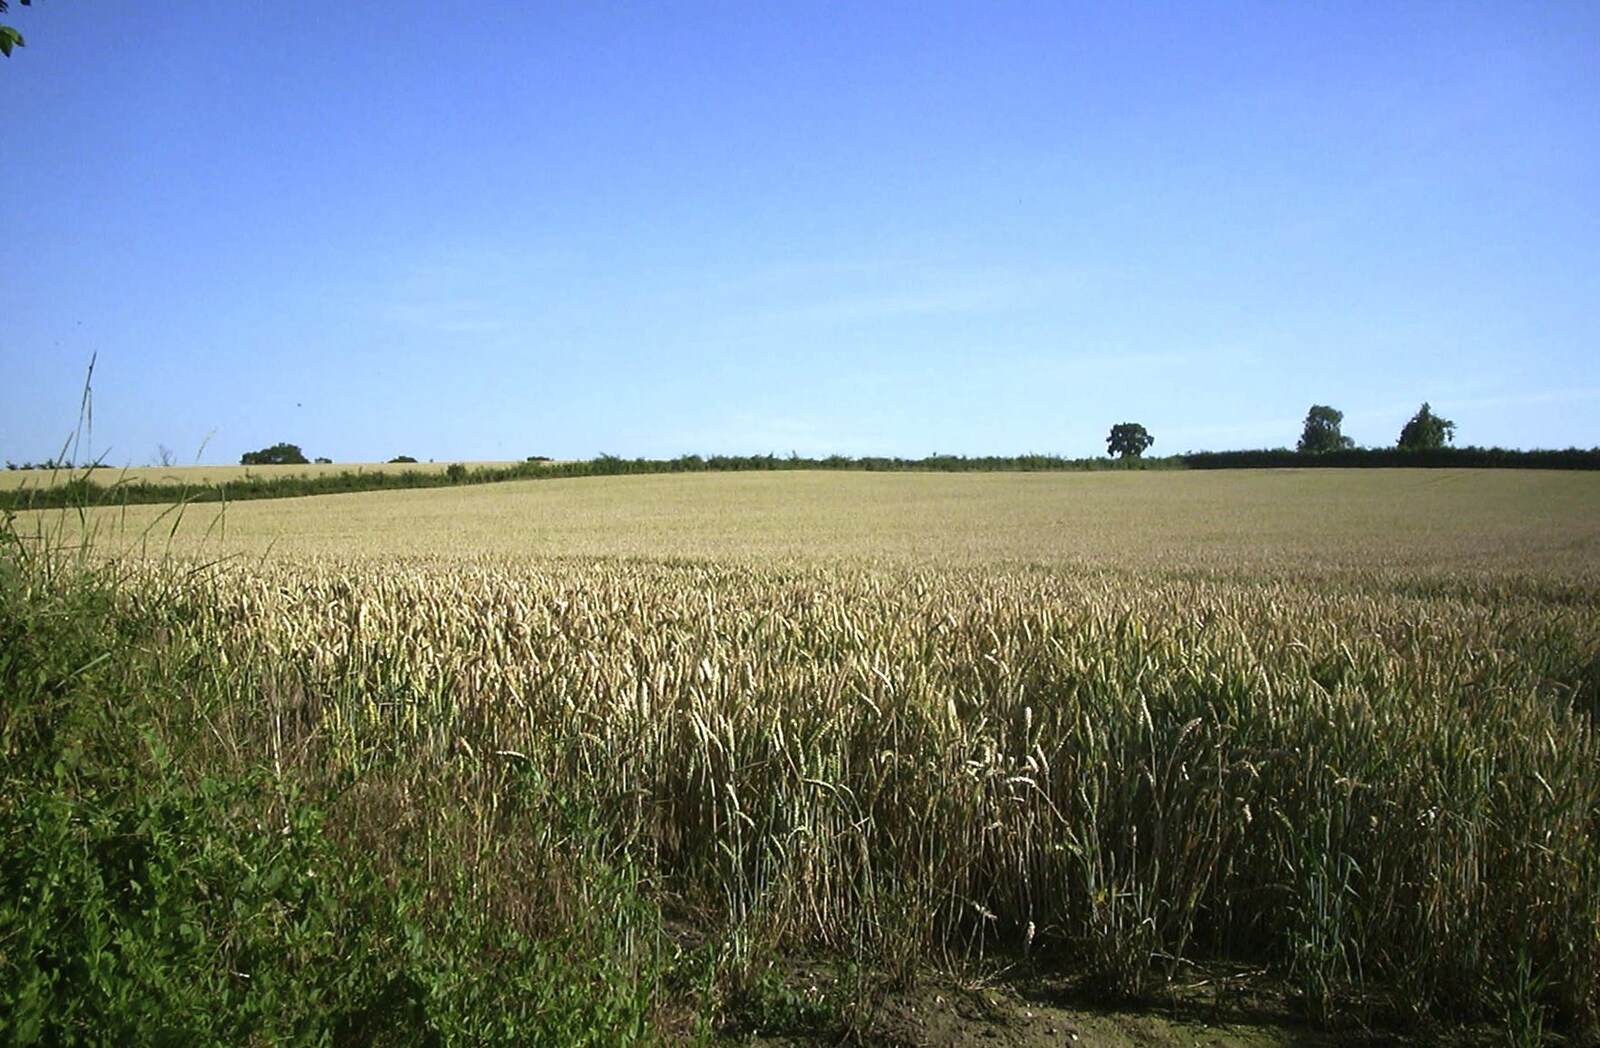 The BSCC Annual Bike Ride, Orford, Suffolk - 12th July 2003: Rolling Suffolk wheat fields